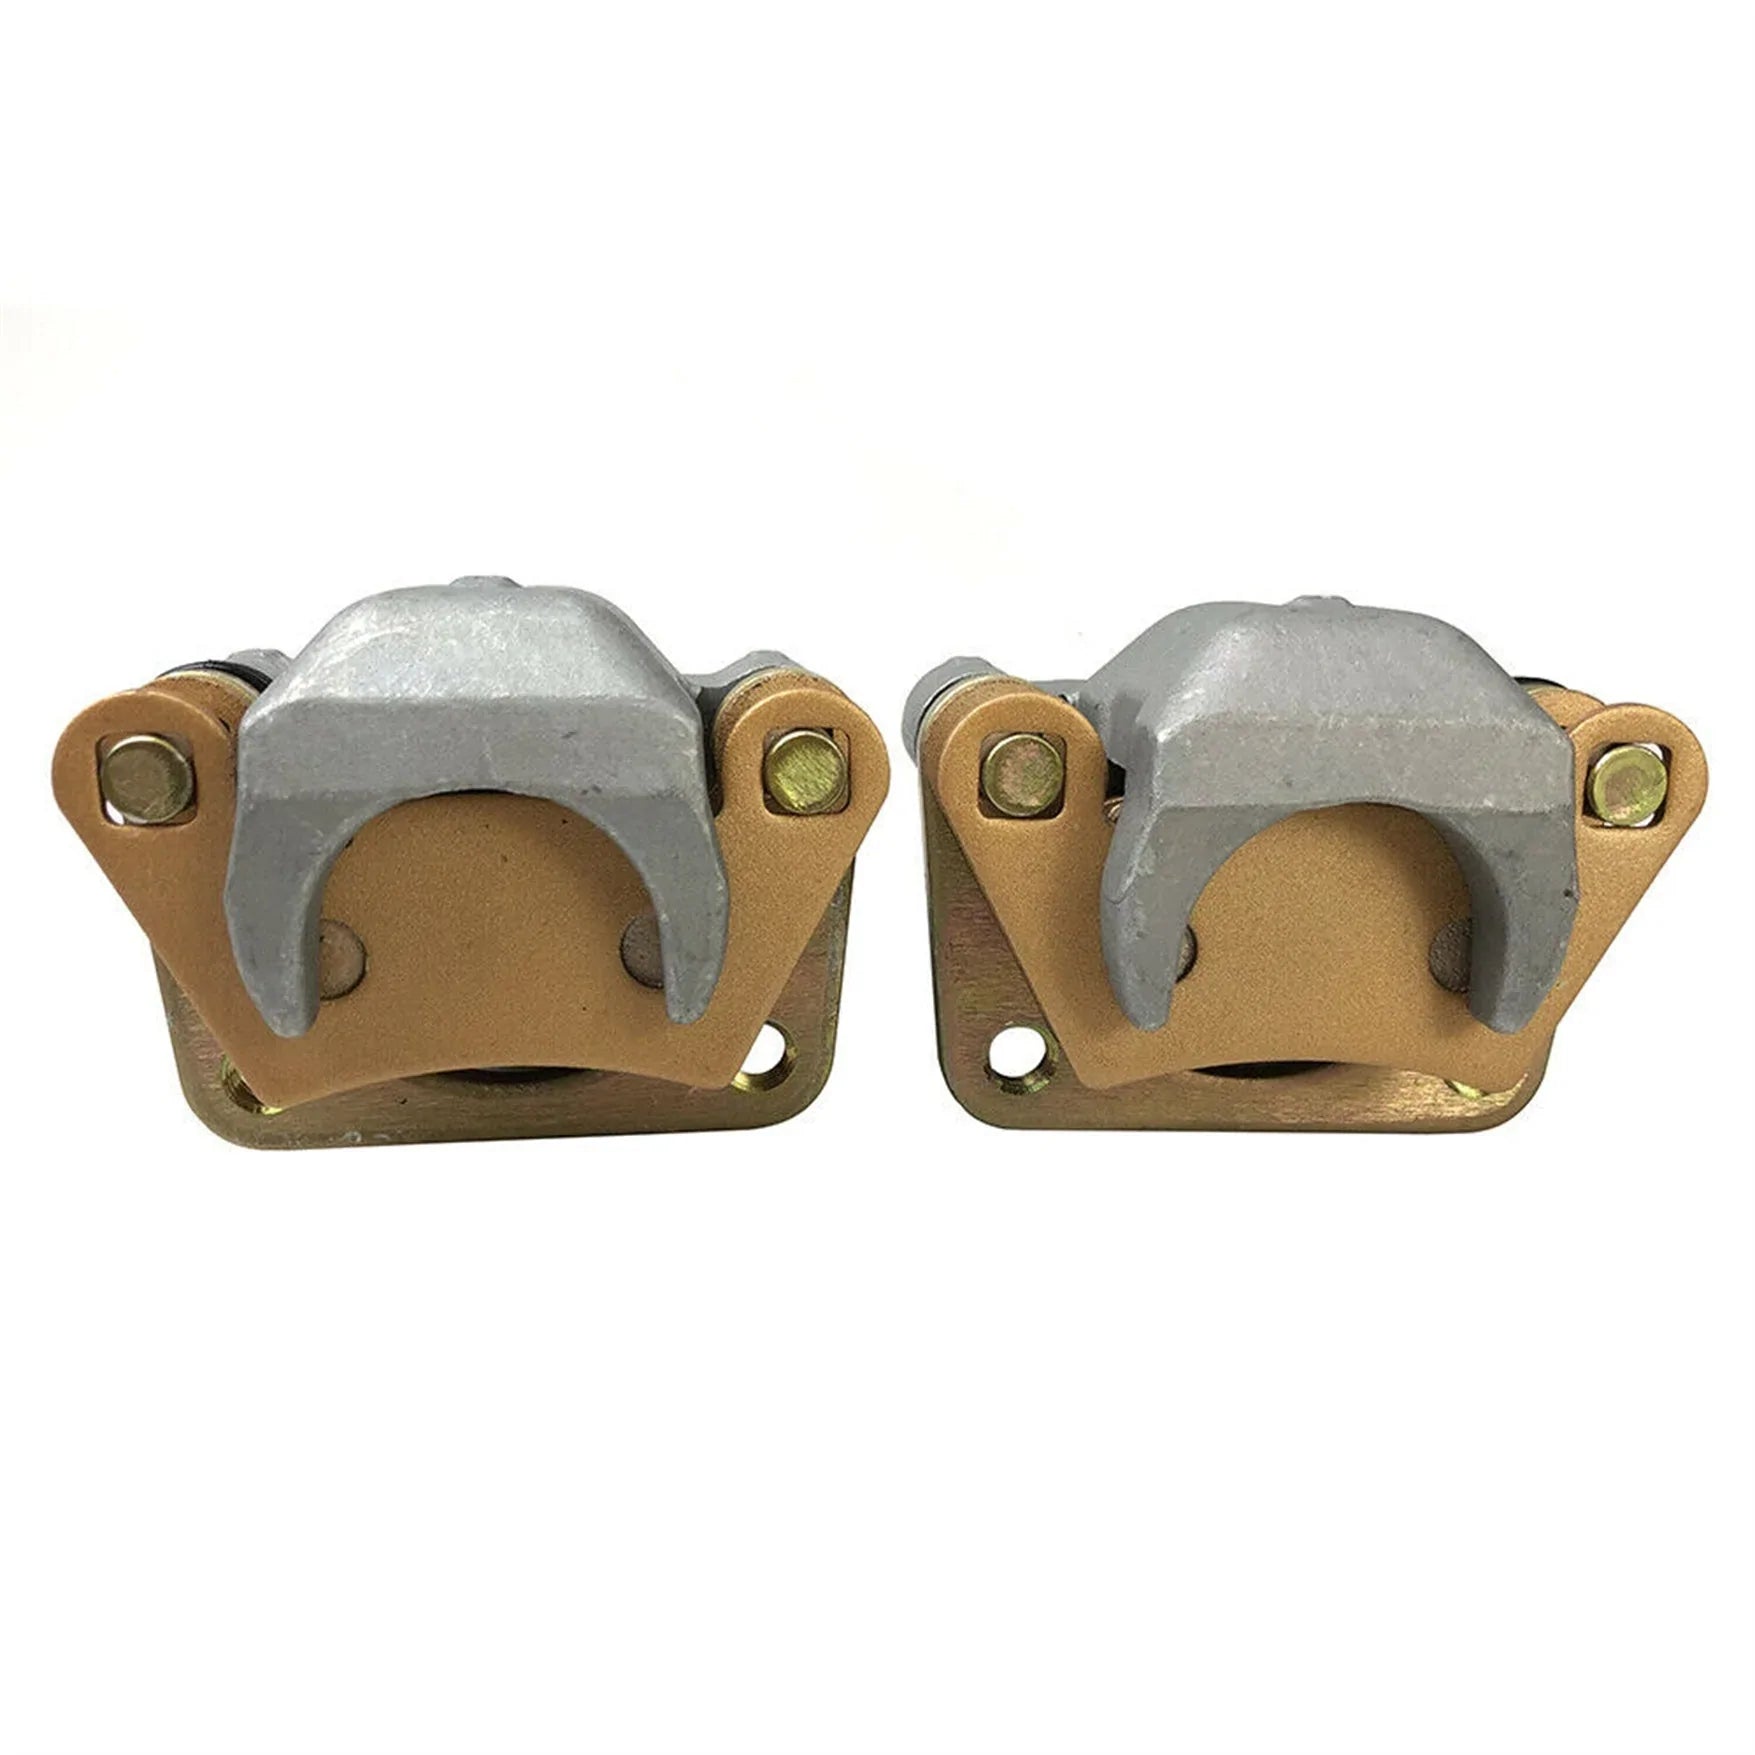 Pair Rear Left and Right Brake Calipers Sets Replacement for Polaris Ranger XP 570 XP 900 XP 1000 EPS 4x4 w/Pads LAB WORK MOTO